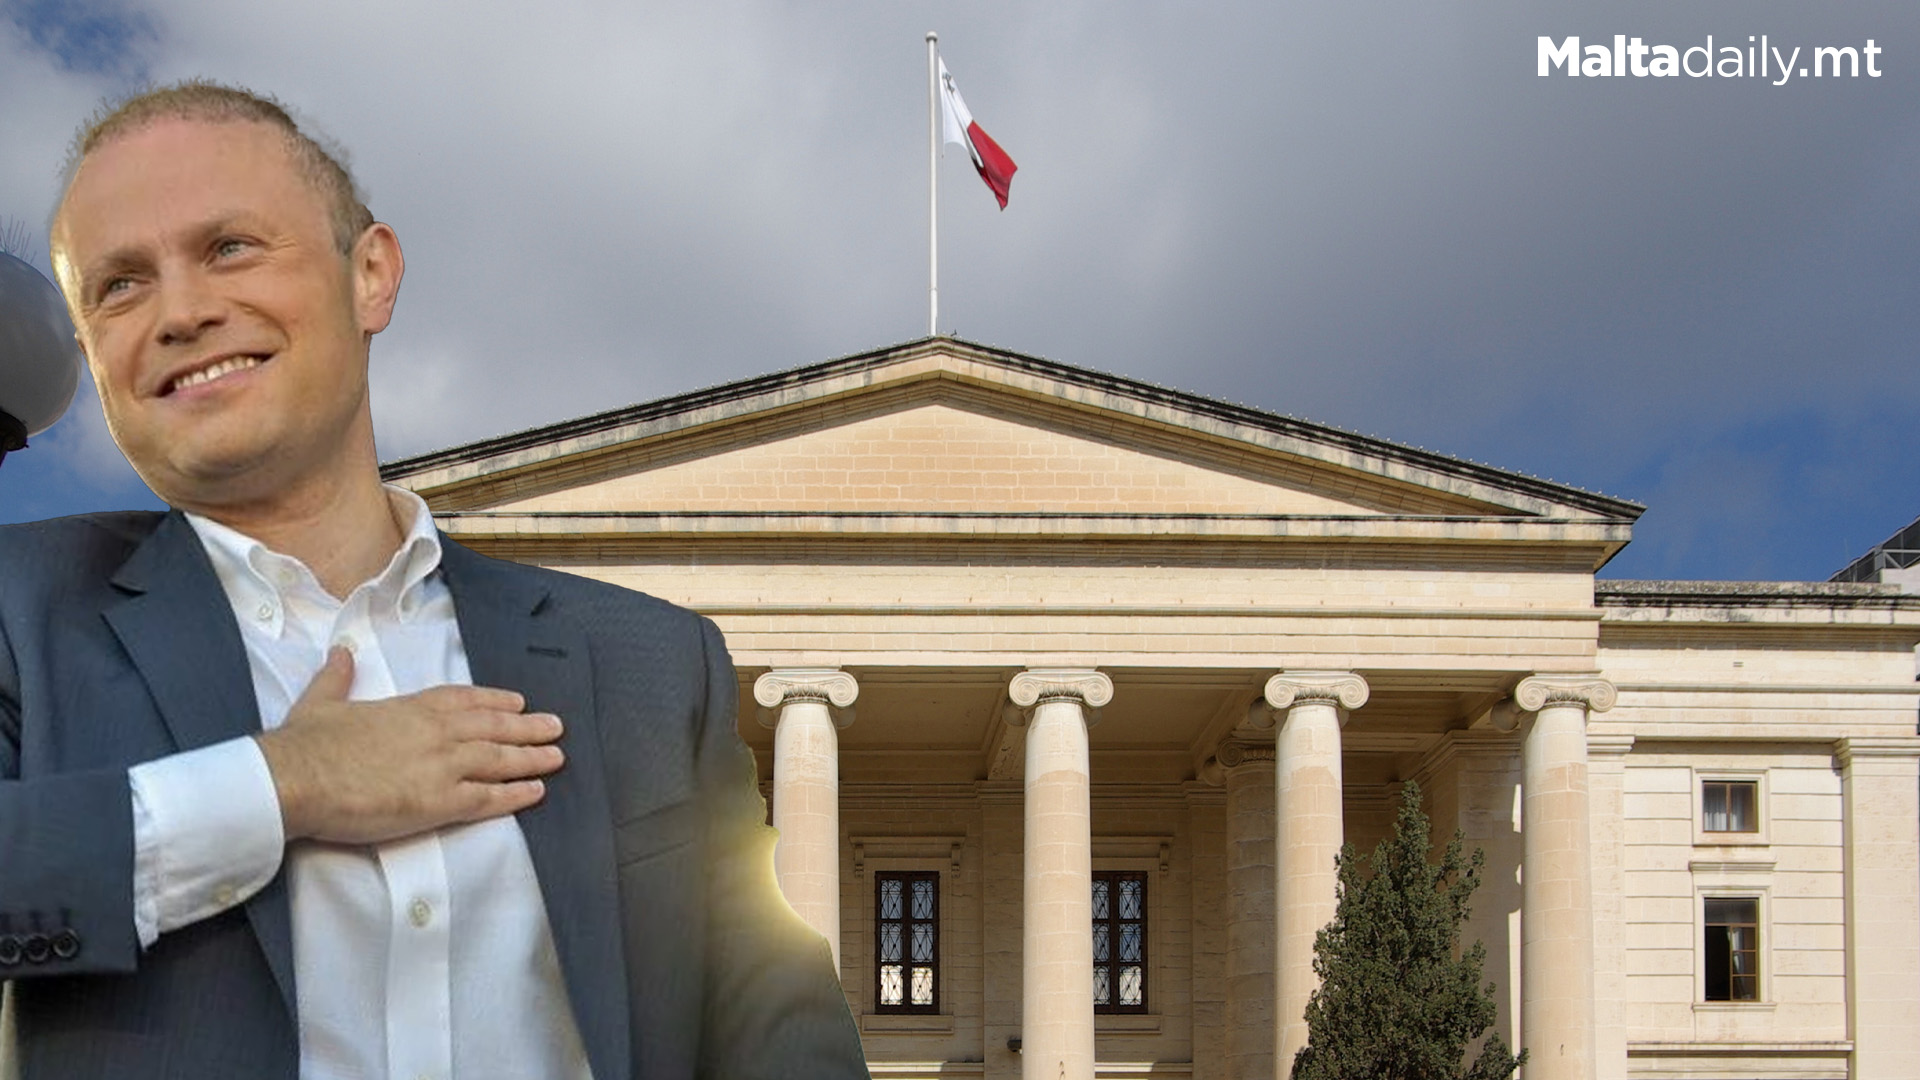 Former PM Joseph Muscat To Face Court Charges Today